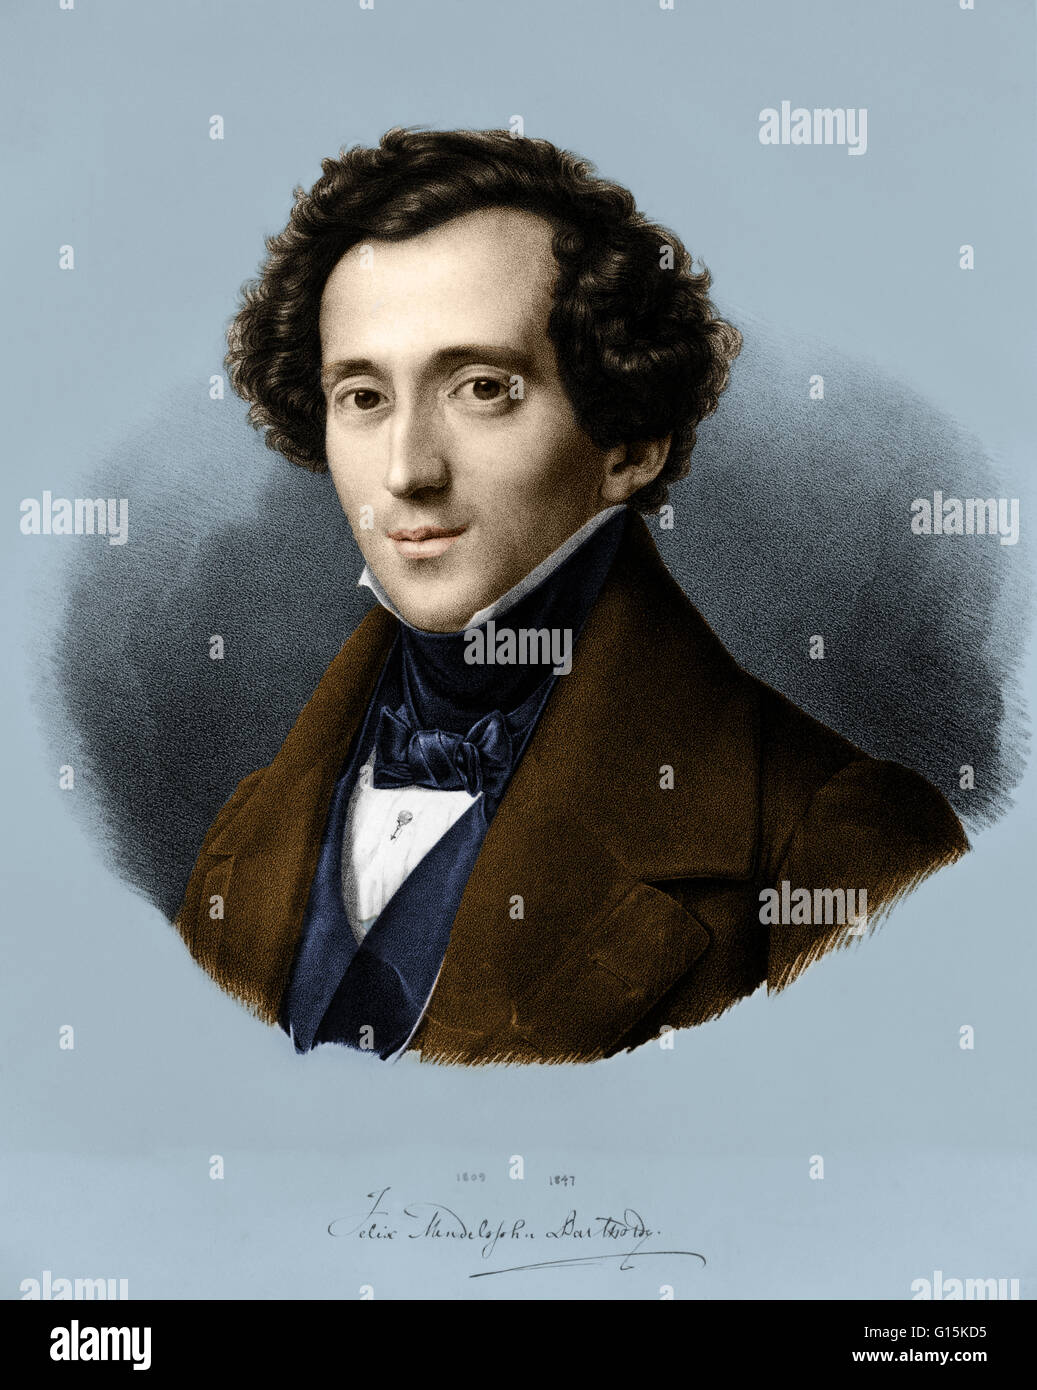 Jakob Ludwig Felix Mendelssohn Bartholdy (February 3, 1809 - November 4, 1847) was a German composer, pianist, organist and conductor of the early Romantic period. A grandson of the philosopher Moses Mendelssohn. He was a musical prodigy. In 1821 he was i Stock Photo